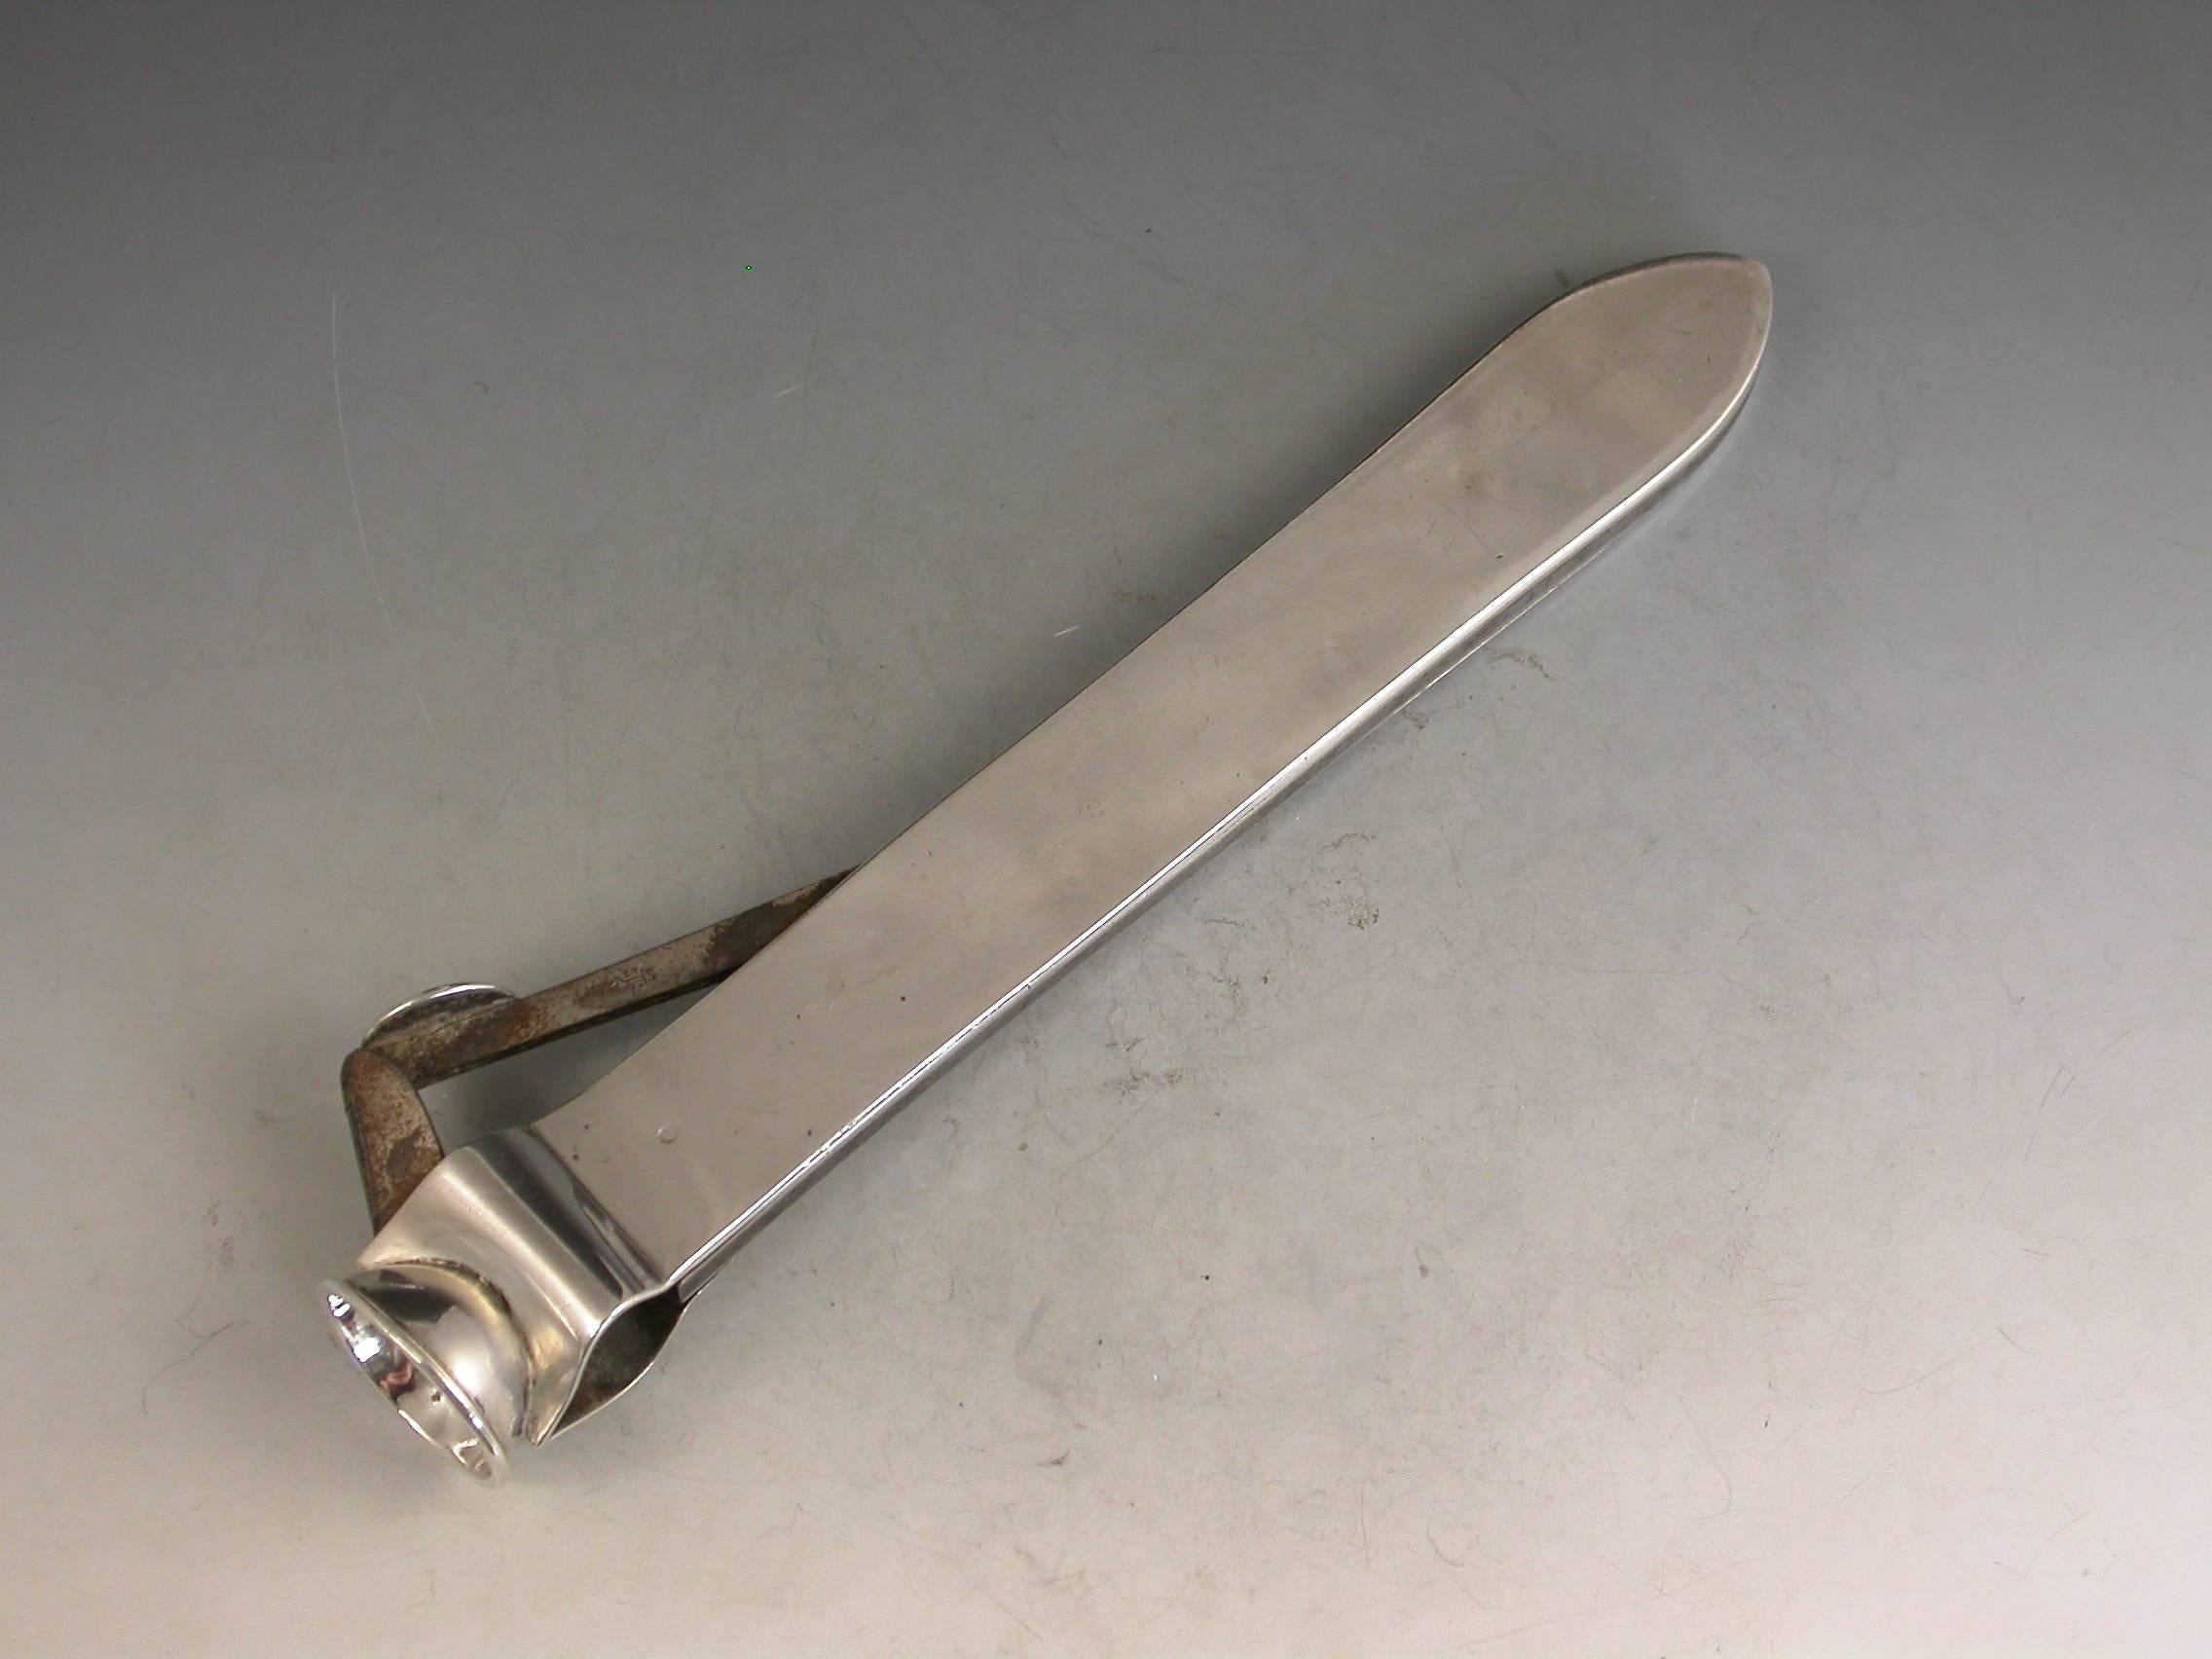 A large and heavy quality George V silver mounted steel Cigar Cutter with plain silver side plates incorporating a steel blade.

By J C Vickery, London, 1911

In good condition with no damage or repair.

Measures: Height 23 mm (0.91